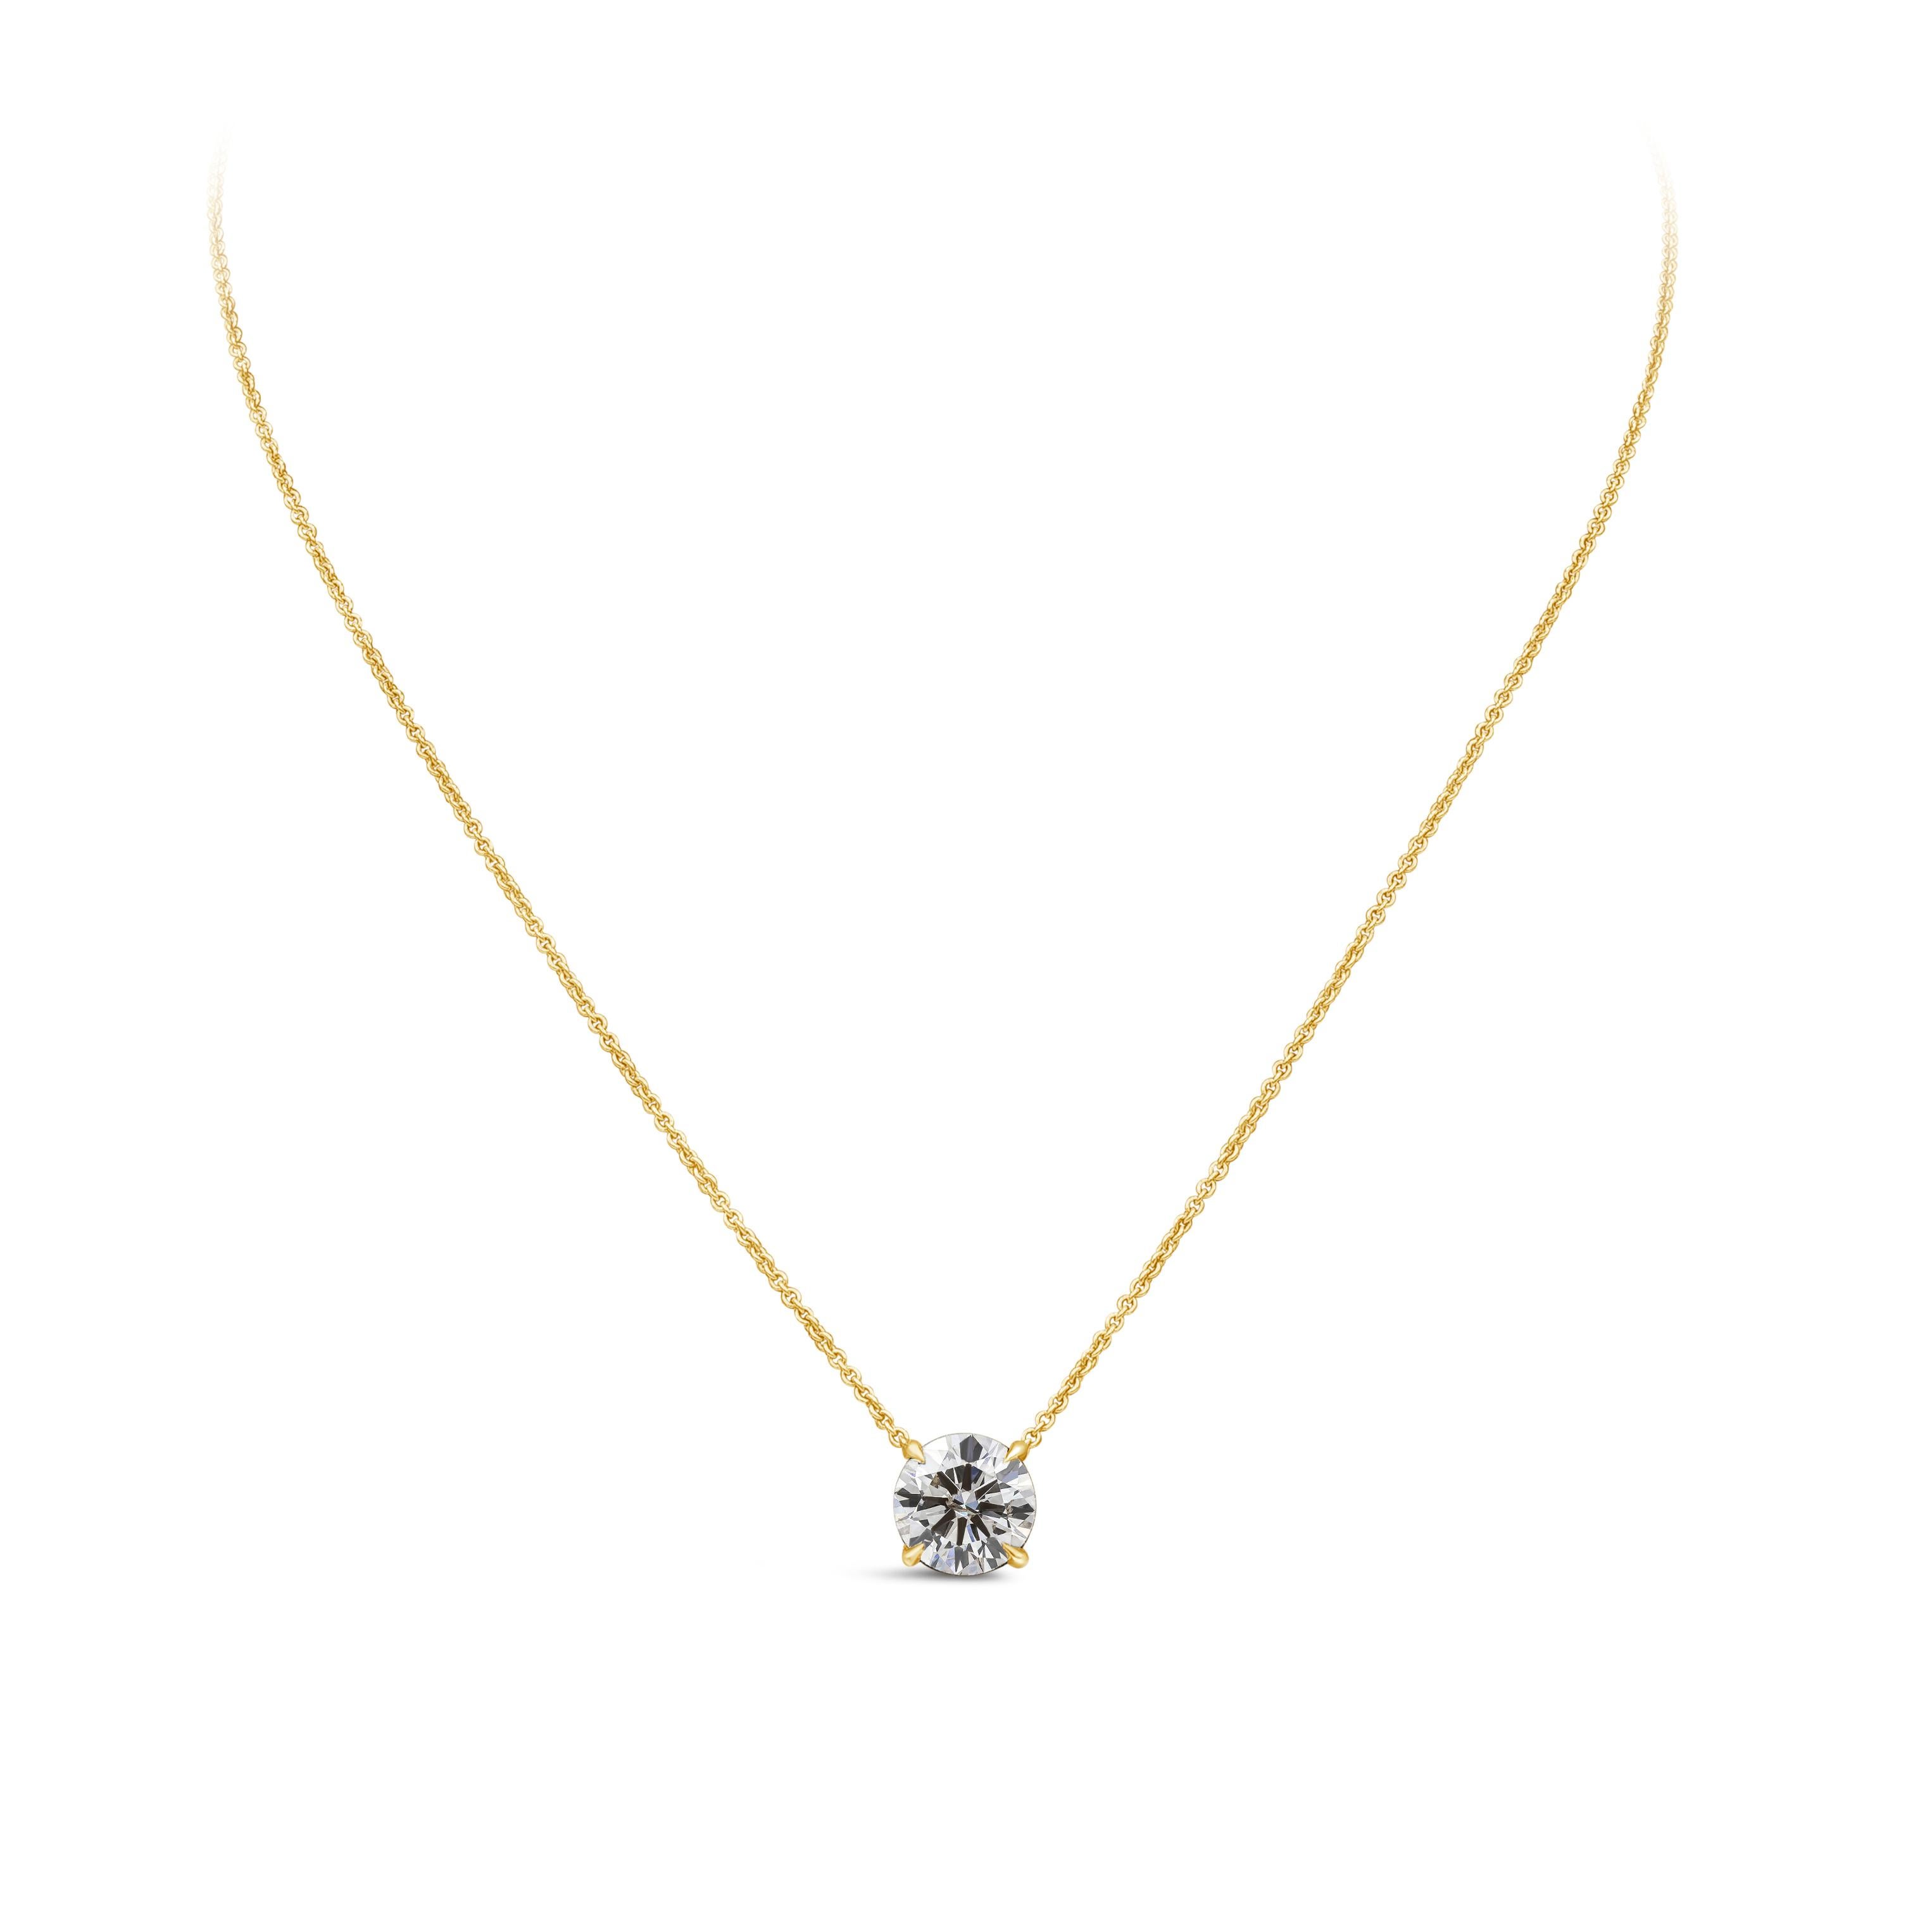 A classic solitaire pendant necklace showcasing a single round brilliant diamond weighing 2.01 carats, K color and I1 in clarity. Set in a traditional four-prong setting made in 14 karat yellow gold. Suspended on an 18 inch yellow gold chain.

Roman